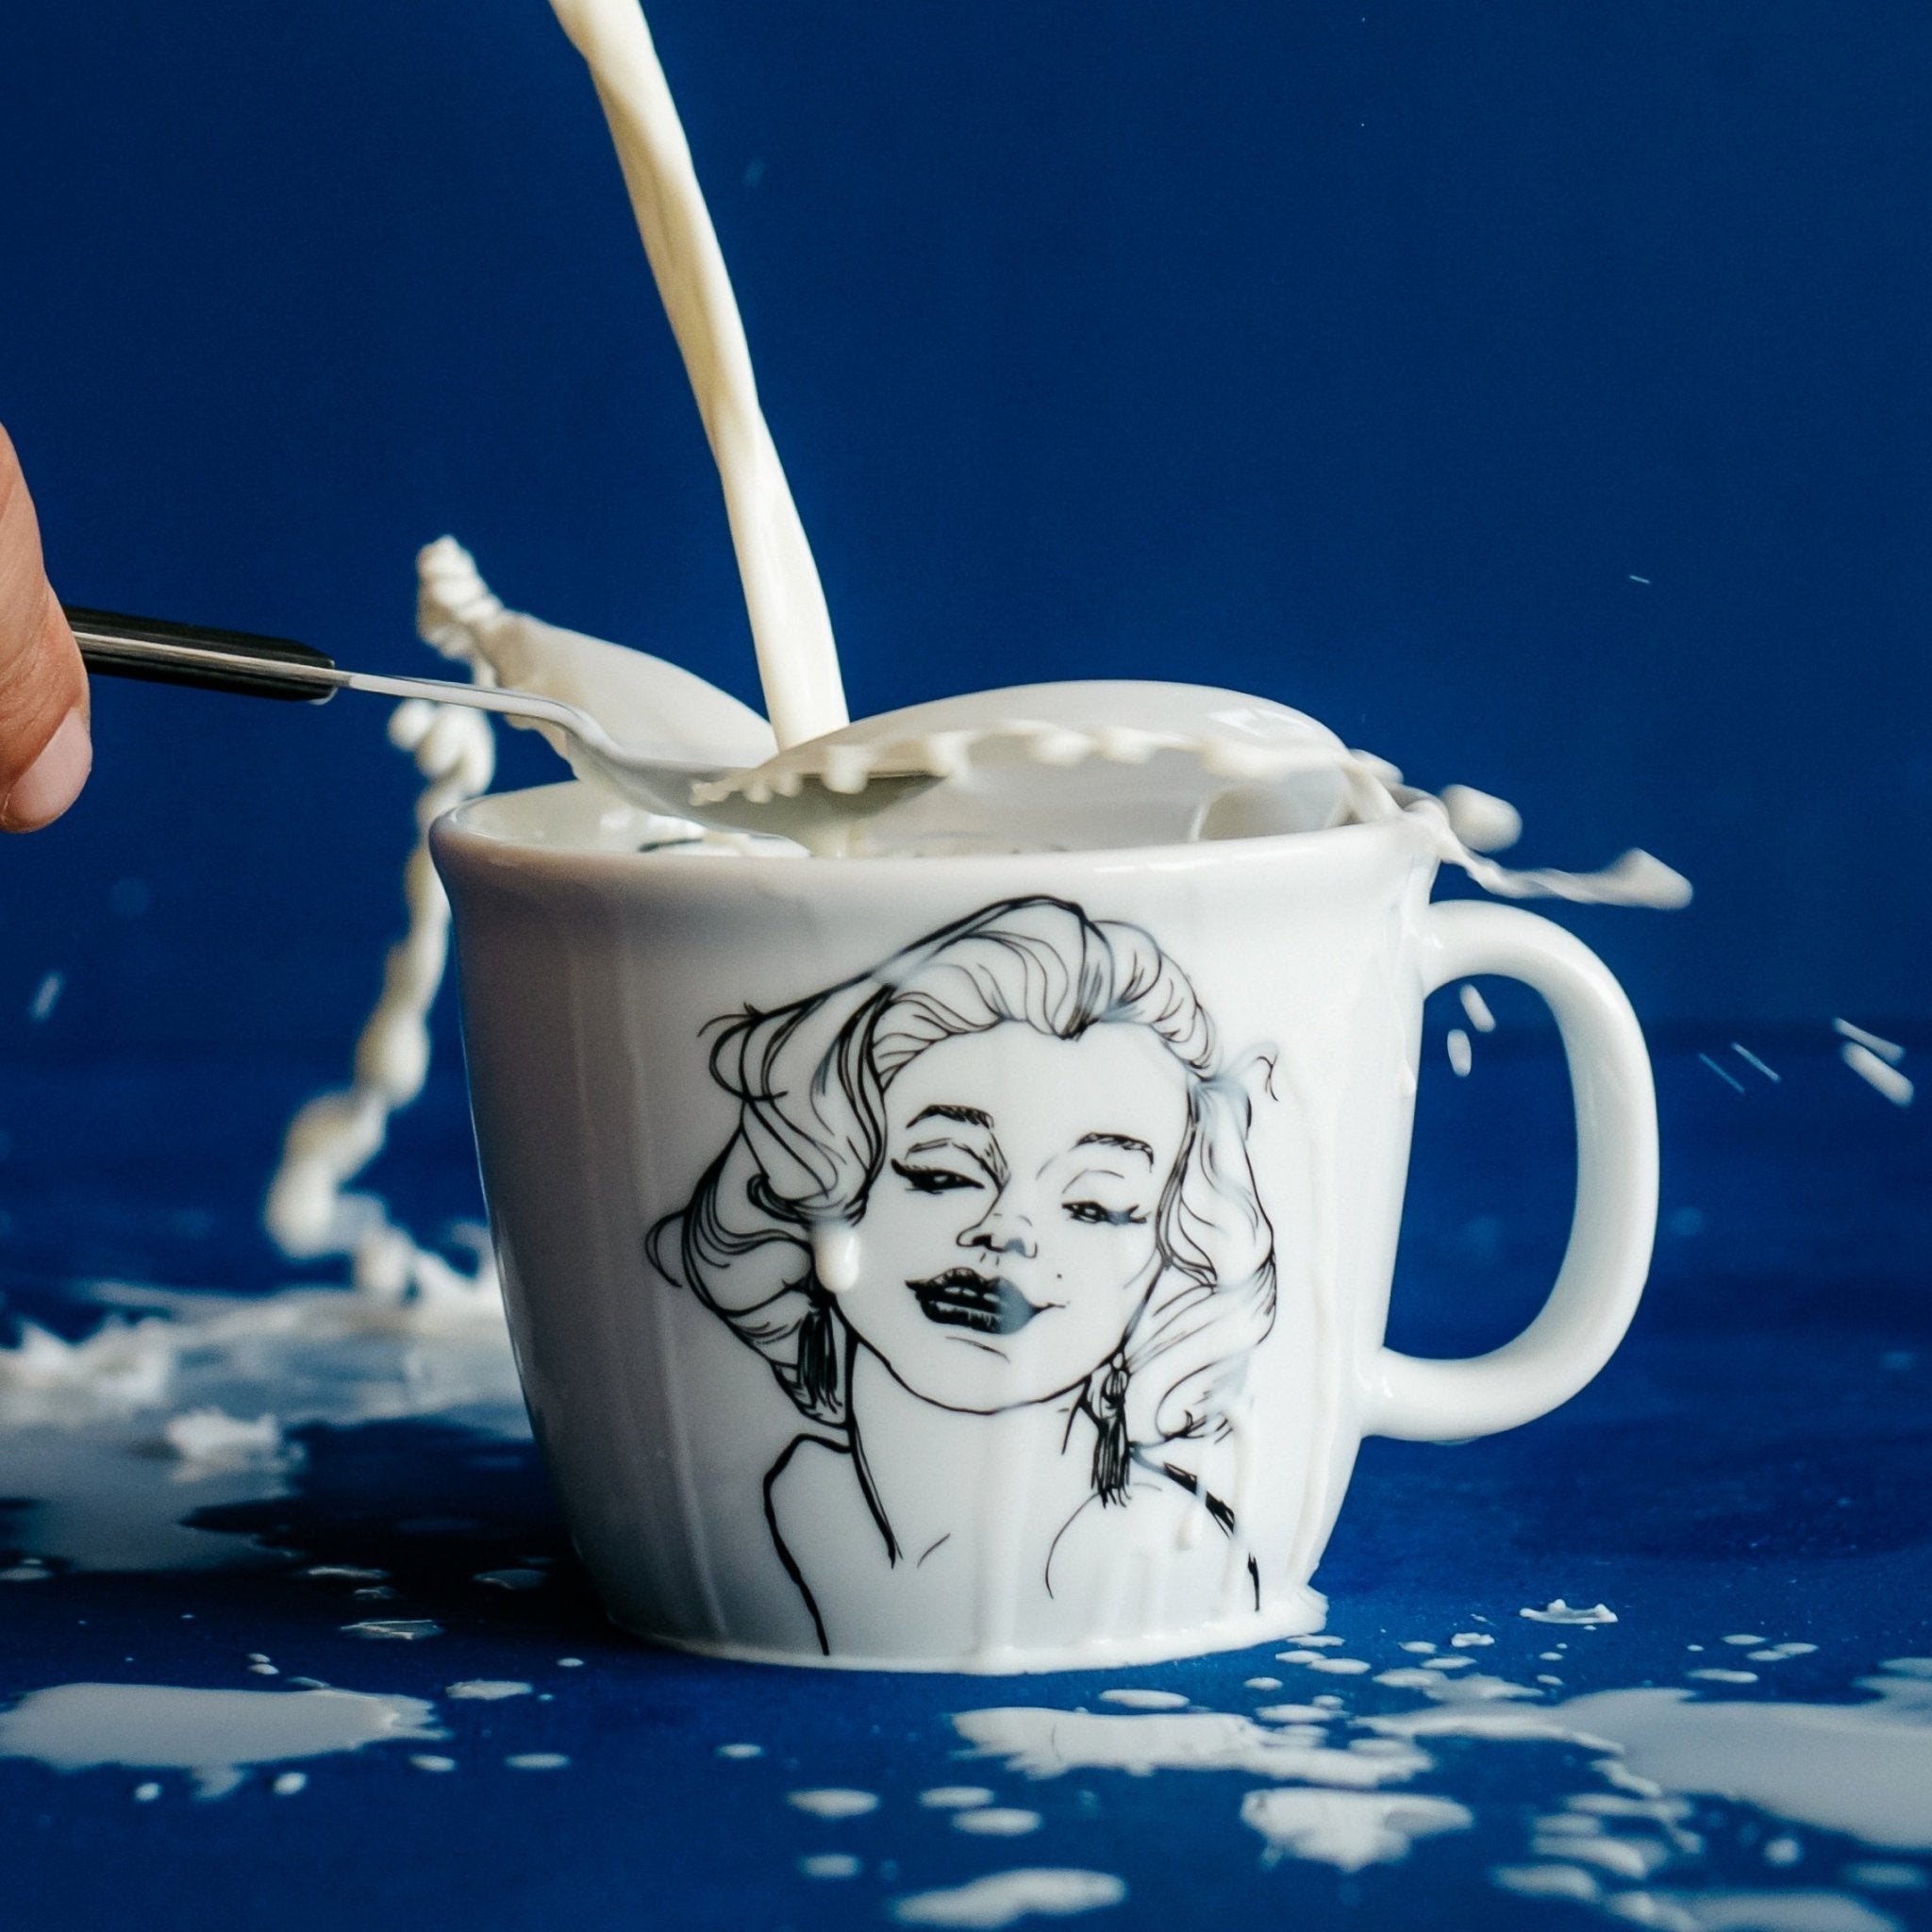 Porcelain cup inspired by Marilyn Monroe with a splash of milk